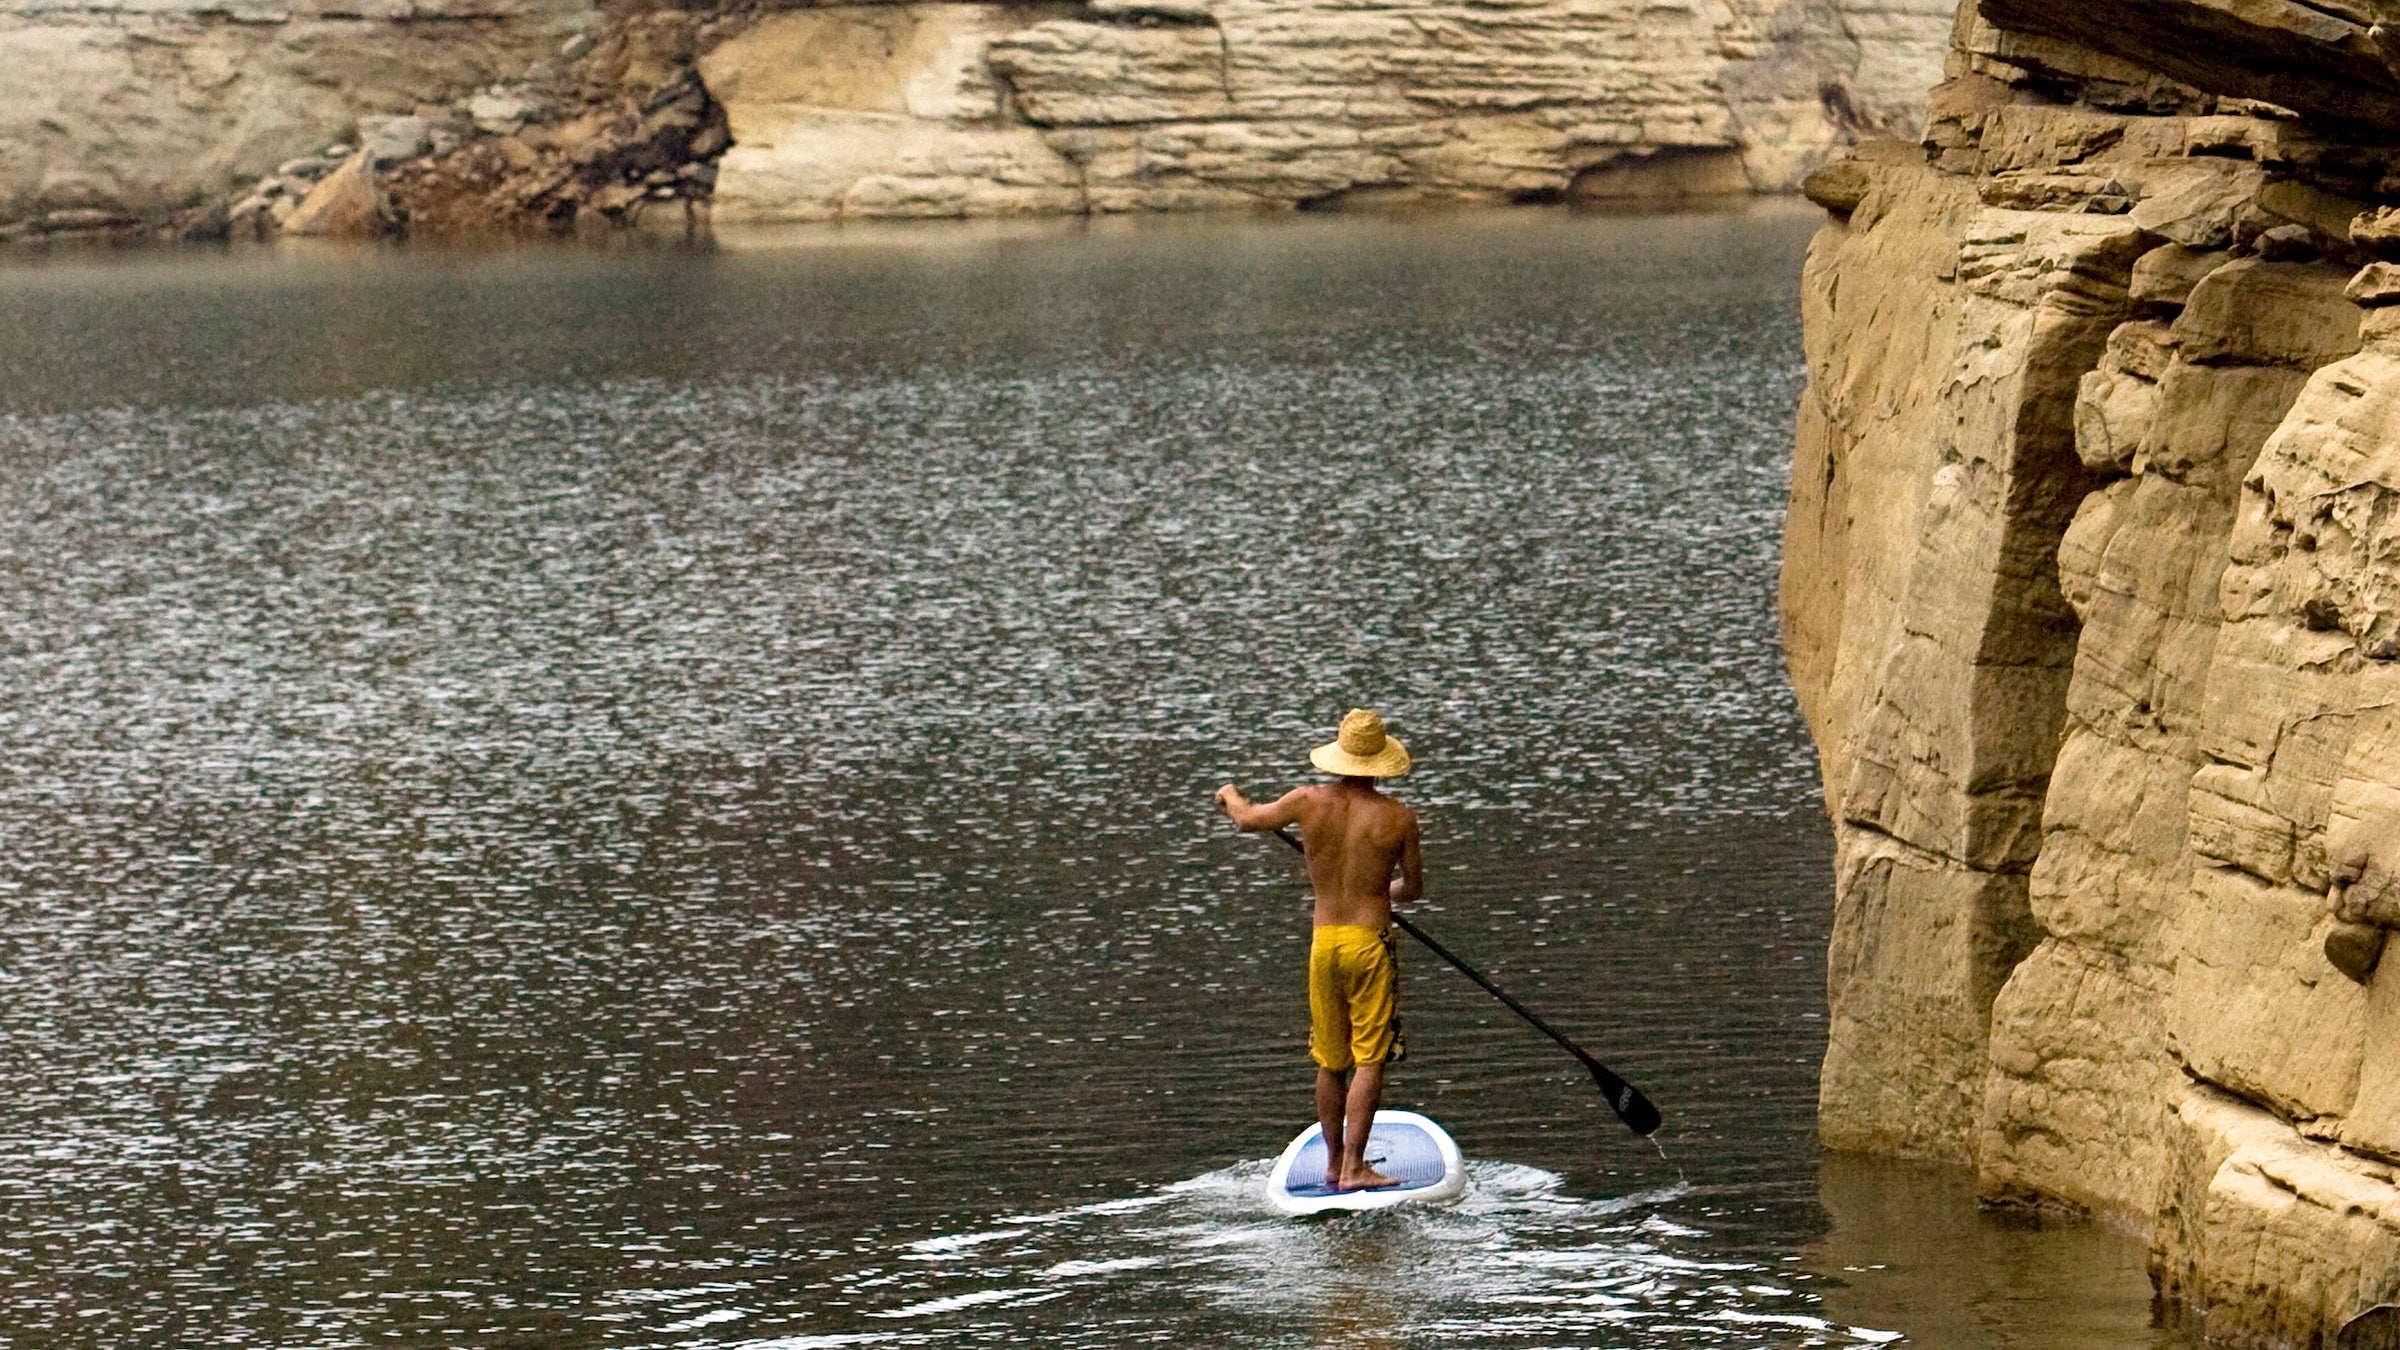 One man stand up paddleboarding on a lake under big cliffs with fall colors.